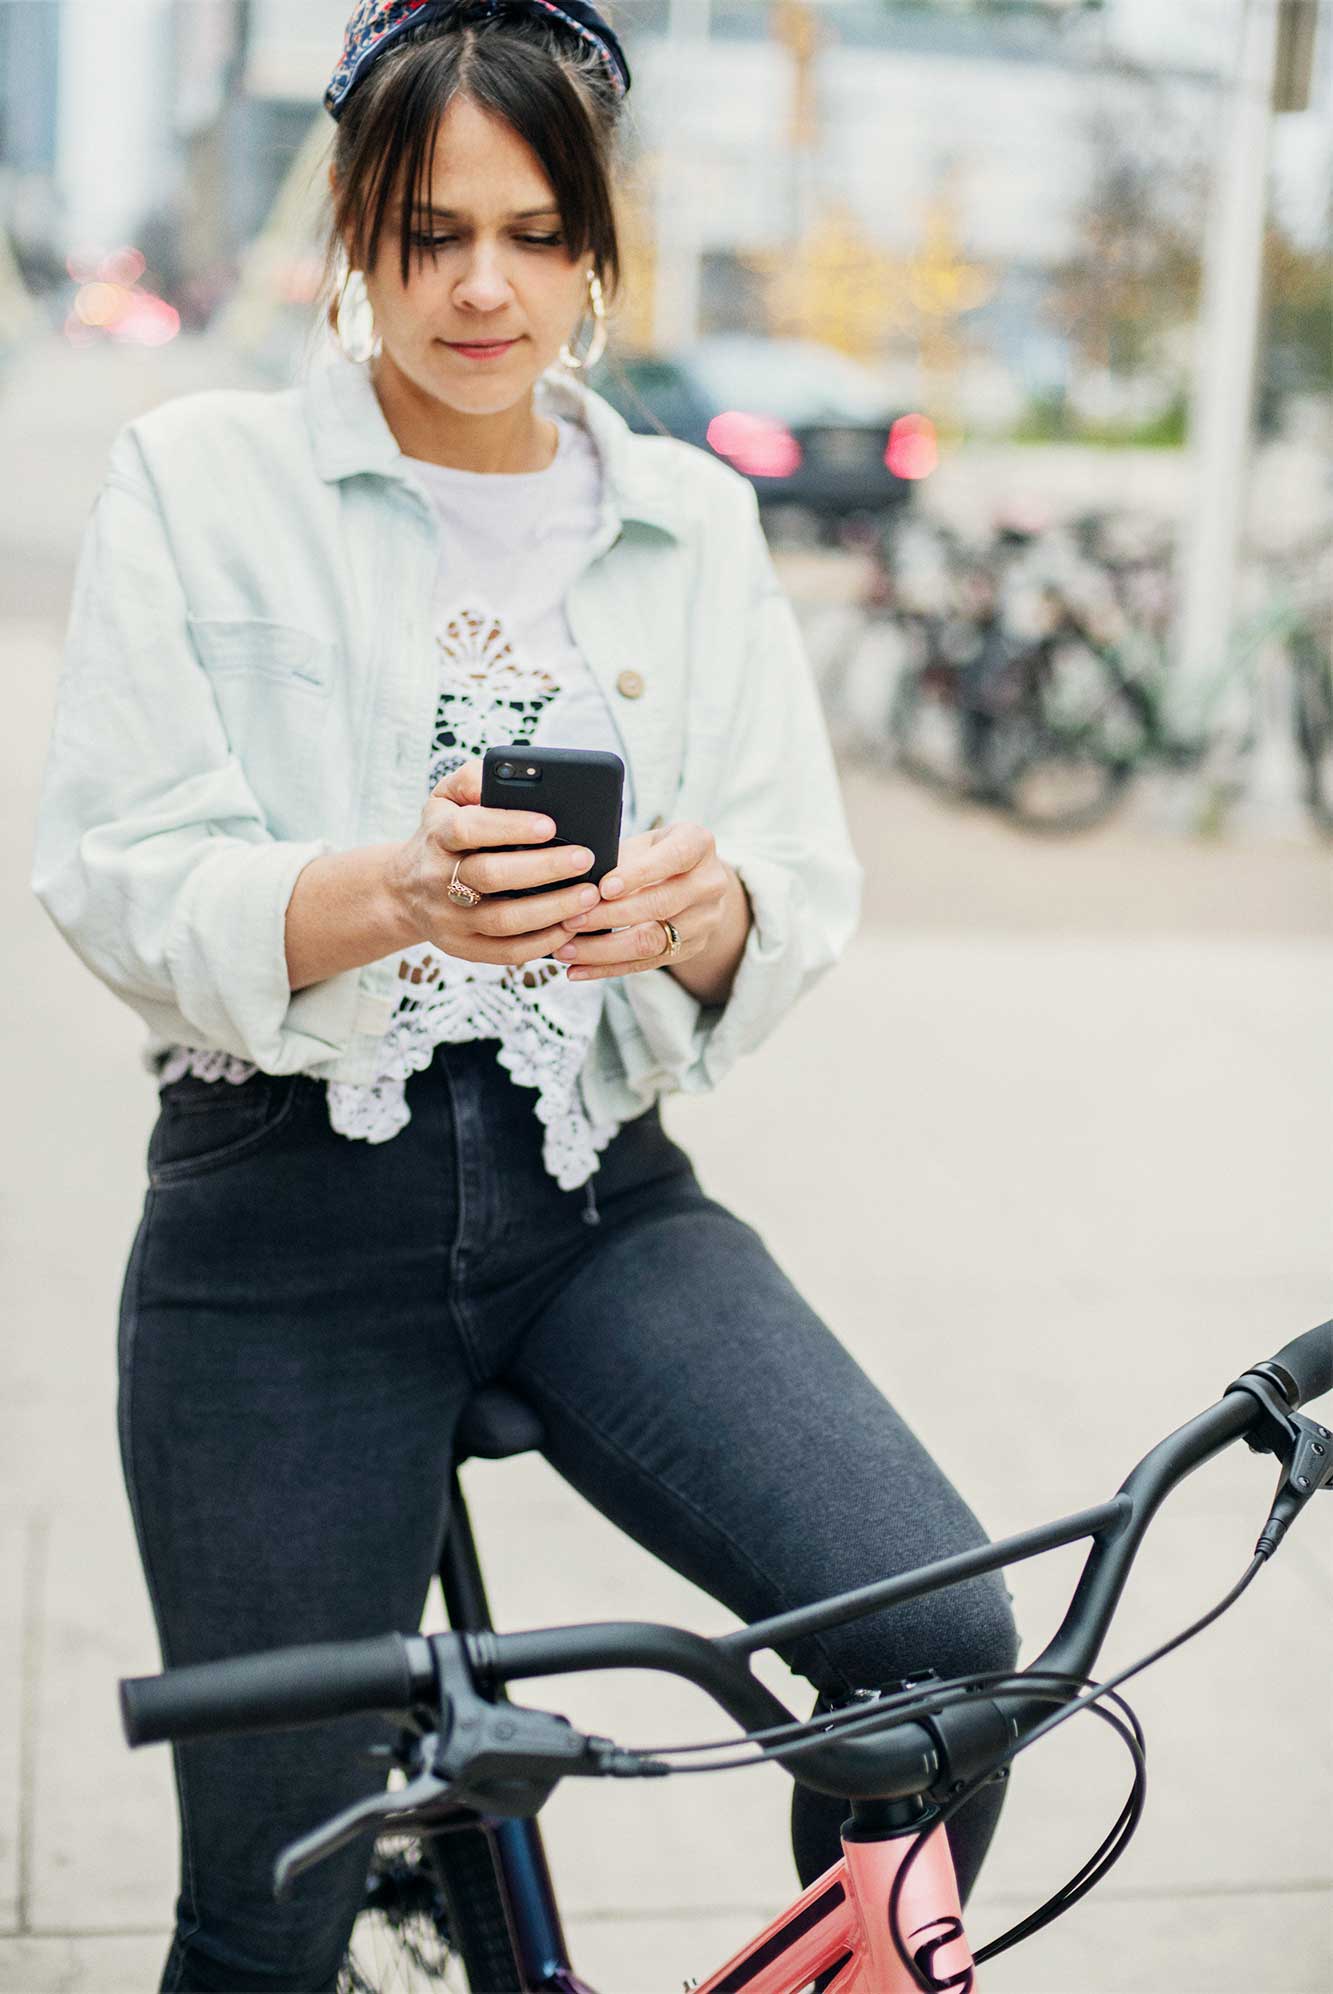 Karen Skloss on a bicycle holding a phone